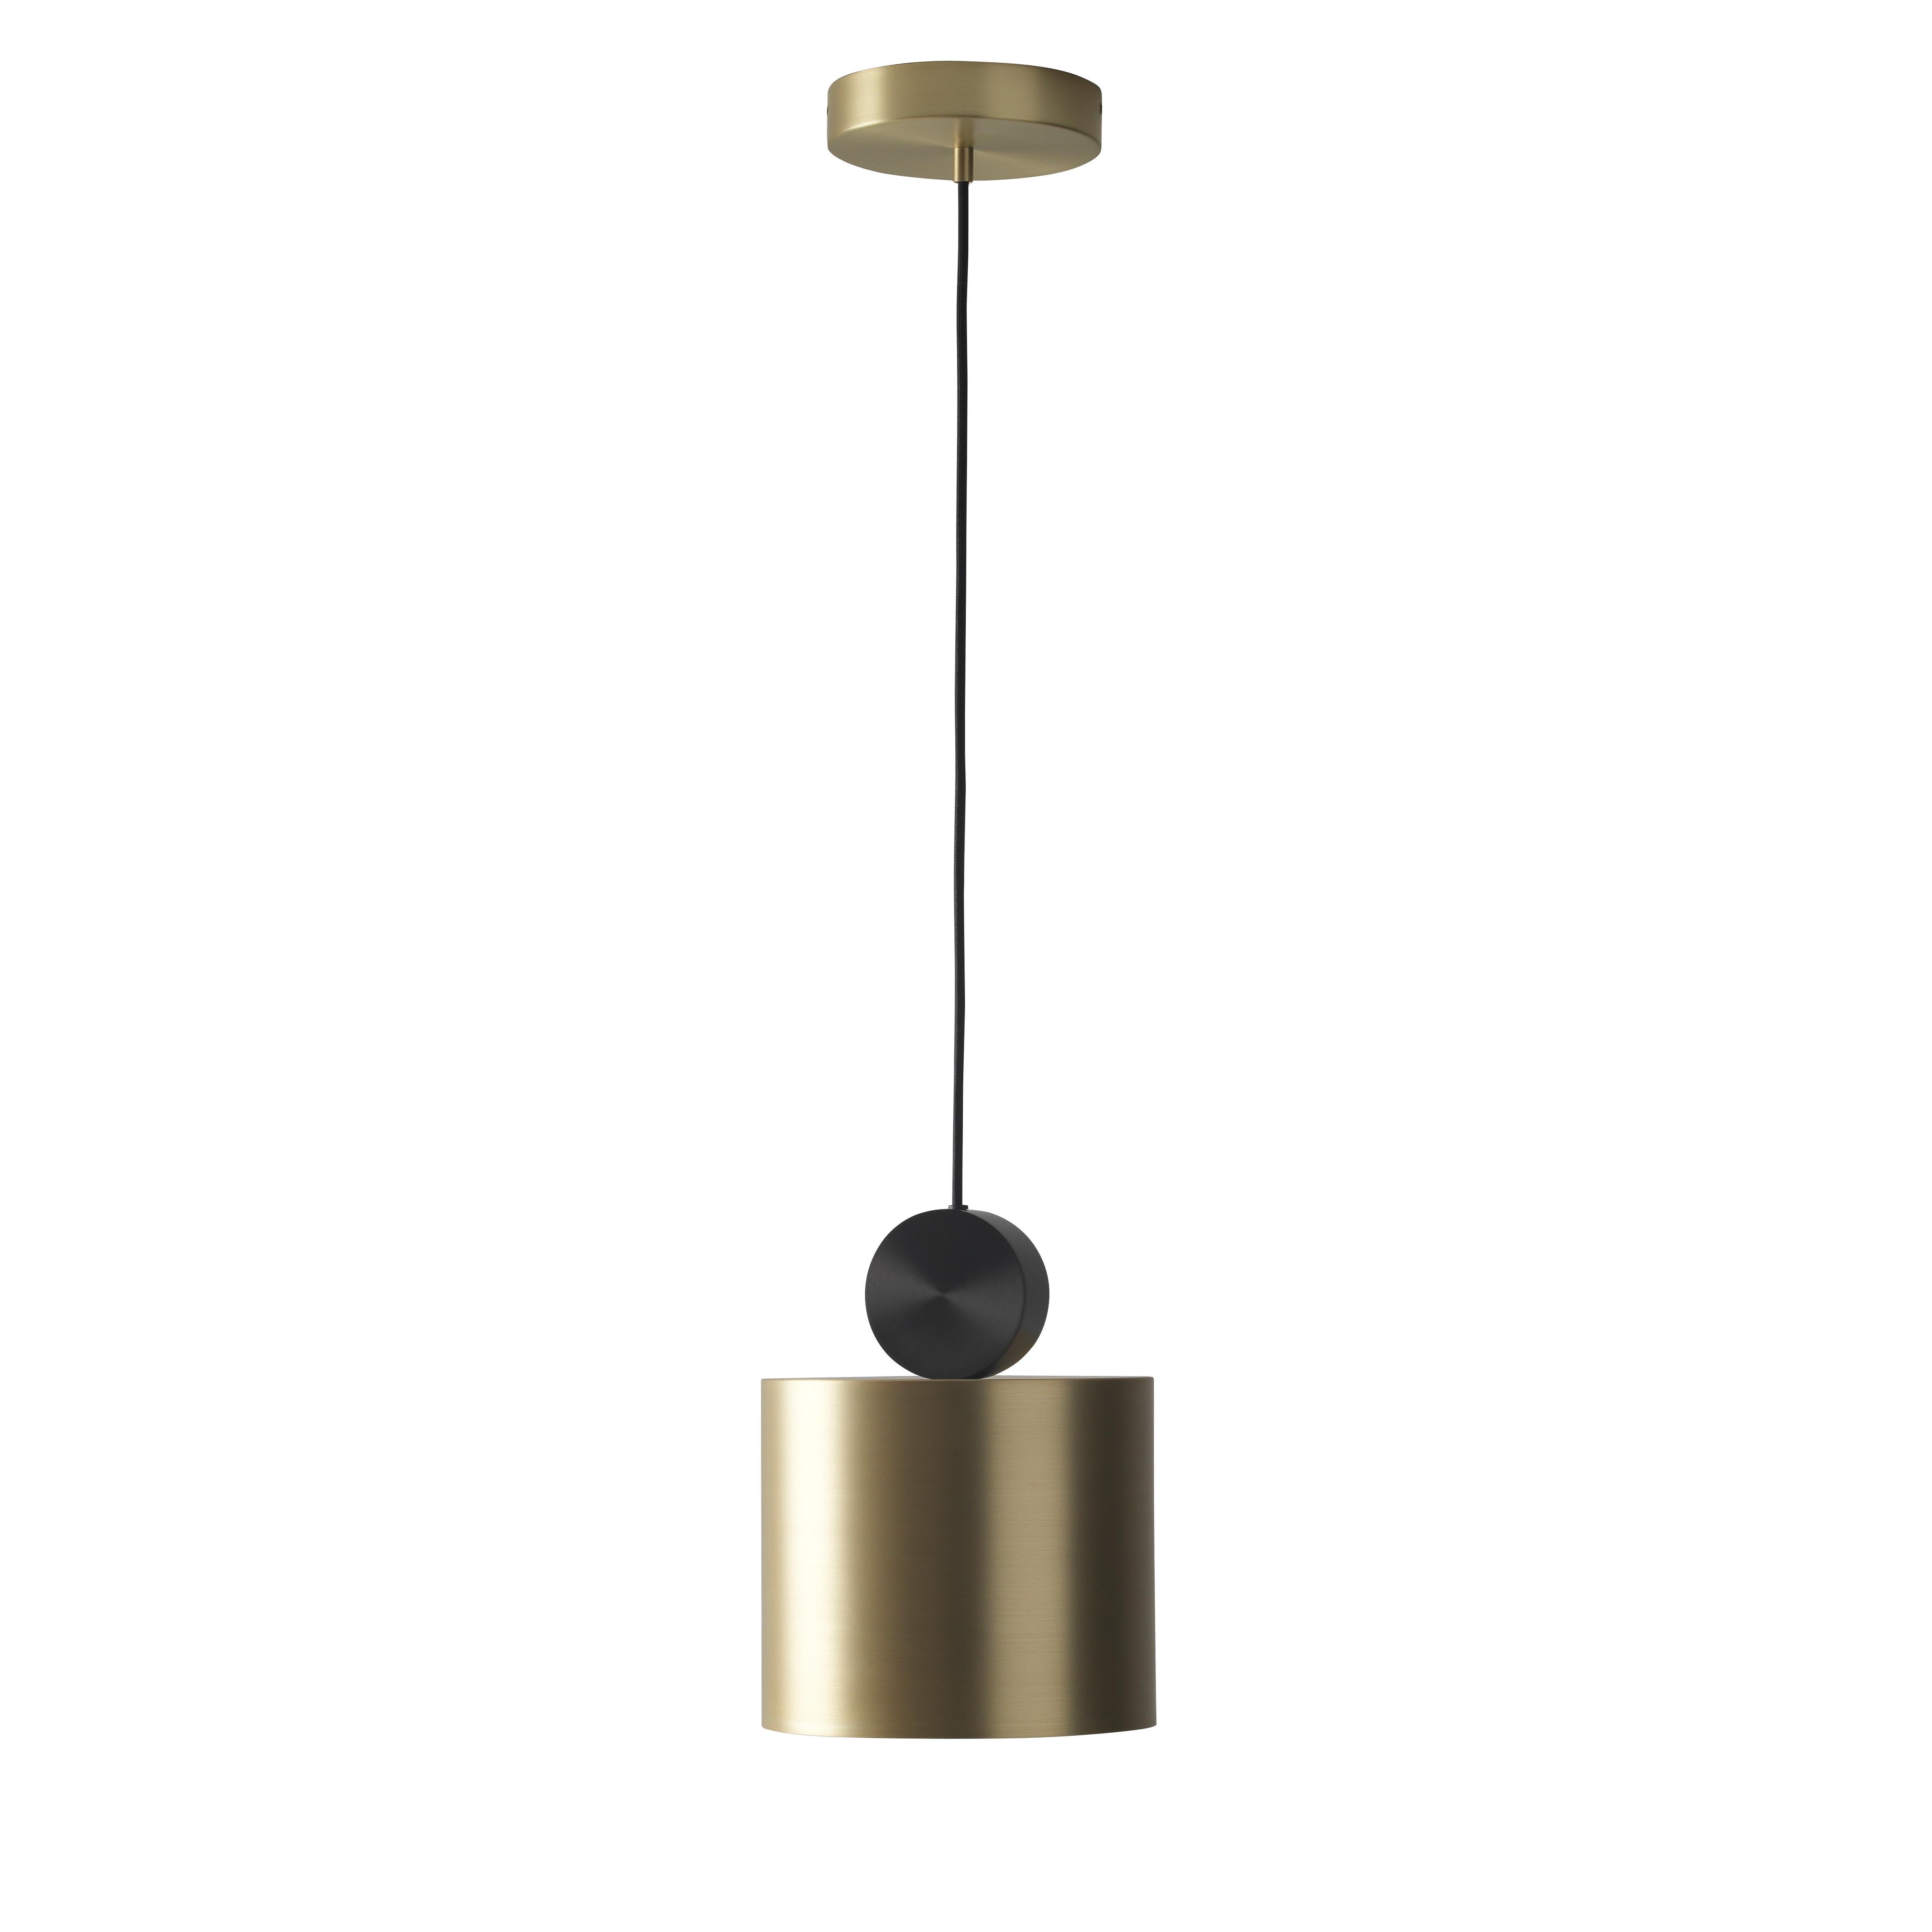 Calee V1 Pendant by POOL
Dimensions: D16 X H231.3 cm
Materials: solid brass, polycarbonate, black textile cable (2m).
Others finishes and dimensions are available. 

All our lamps can be wired according to each country. If sold to the USA it